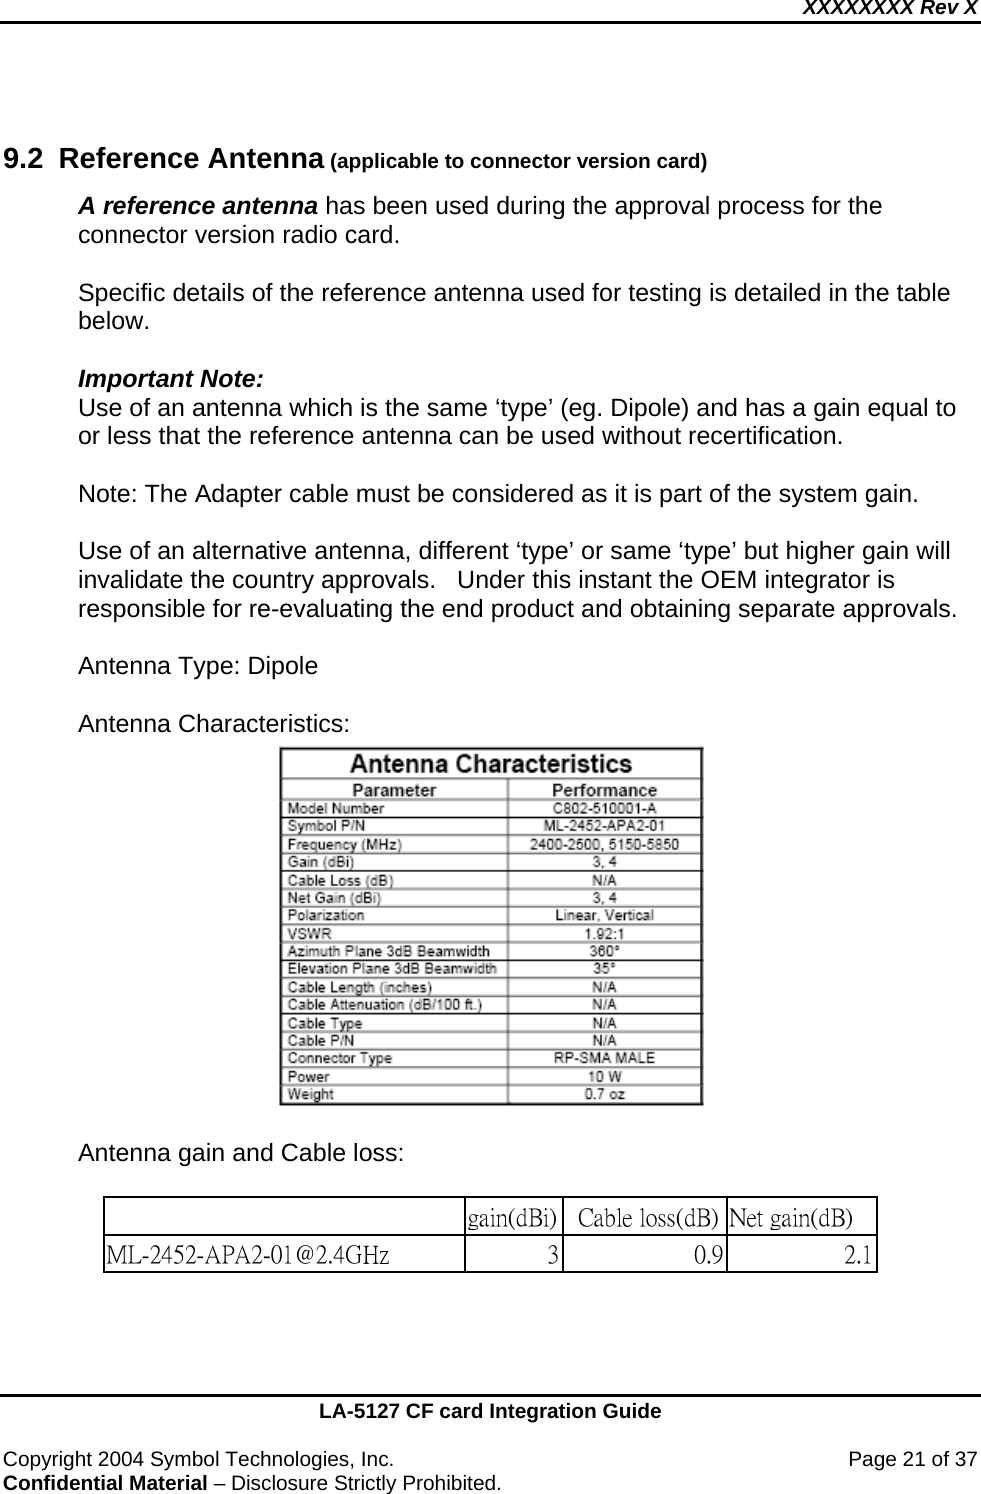 XXXXXXXX Rev X    LA-5127 CF card Integration Guide  Copyright 2004 Symbol Technologies, Inc.    Page 21 of 37 Confidential Material – Disclosure Strictly Prohibited.  9.2 Reference Antenna (applicable to connector version card) A reference antenna has been used during the approval process for the connector version radio card.    Specific details of the reference antenna used for testing is detailed in the table below.  Important Note: Use of an antenna which is the same ‘type’ (eg. Dipole) and has a gain equal to or less that the reference antenna can be used without recertification.  Note: The Adapter cable must be considered as it is part of the system gain.  Use of an alternative antenna, different ‘type’ or same ‘type’ but higher gain will invalidate the country approvals.   Under this instant the OEM integrator is responsible for re-evaluating the end product and obtaining separate approvals.    Antenna Type: Dipole    Antenna Characteristics:       Antenna gain and Cable loss:                                                             gain(dBi)   Cable loss(dB) Net gain(dB) ML-2452-APA2-01@2.4GHz   3 0.9 2.1   